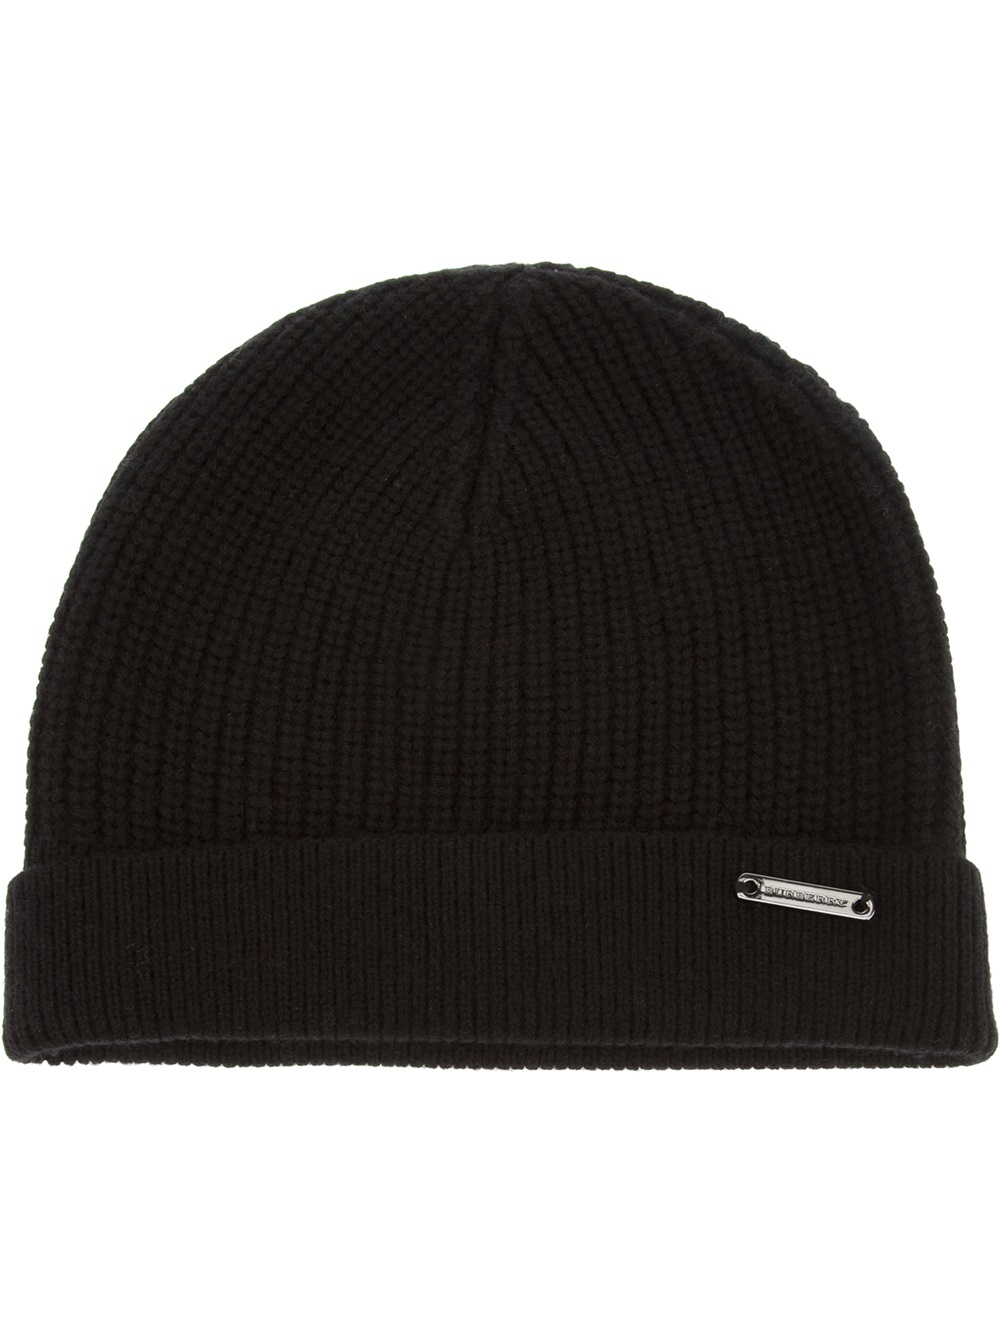 Lyst - Burberry Ribbed Beanie in Black for Men